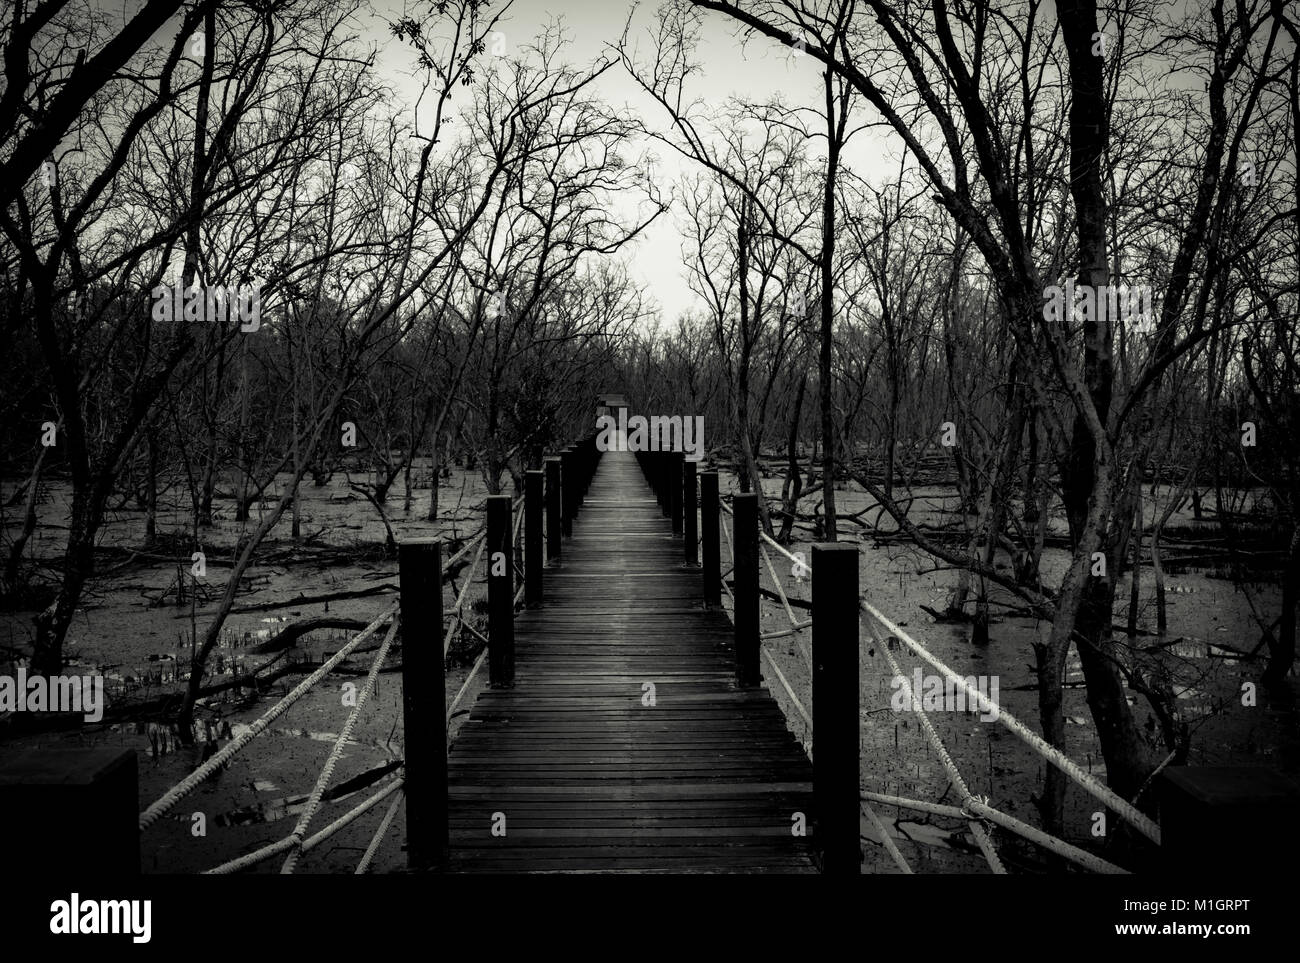 Silhouette of wood bridge with white rope fence in forest. Branches of trees in the cold forest with gray sky background in black and white tone. Desp Stock Photo